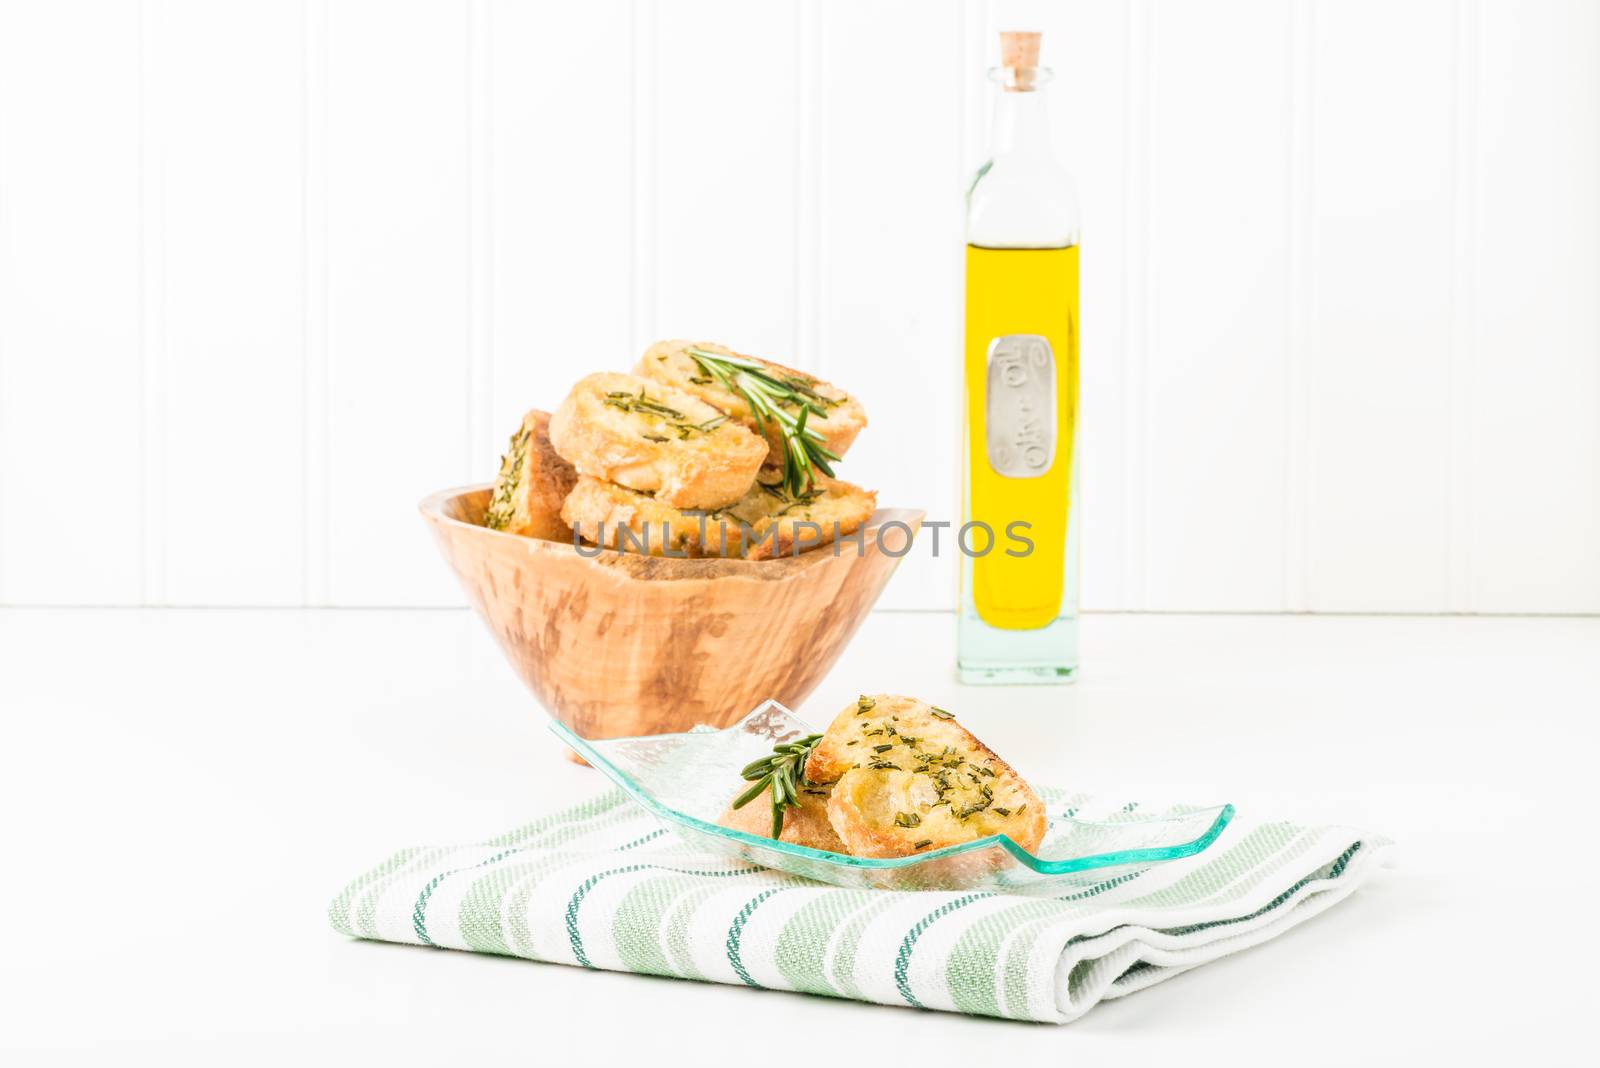 Rosemary Crostini and Olive Oil by billberryphotography